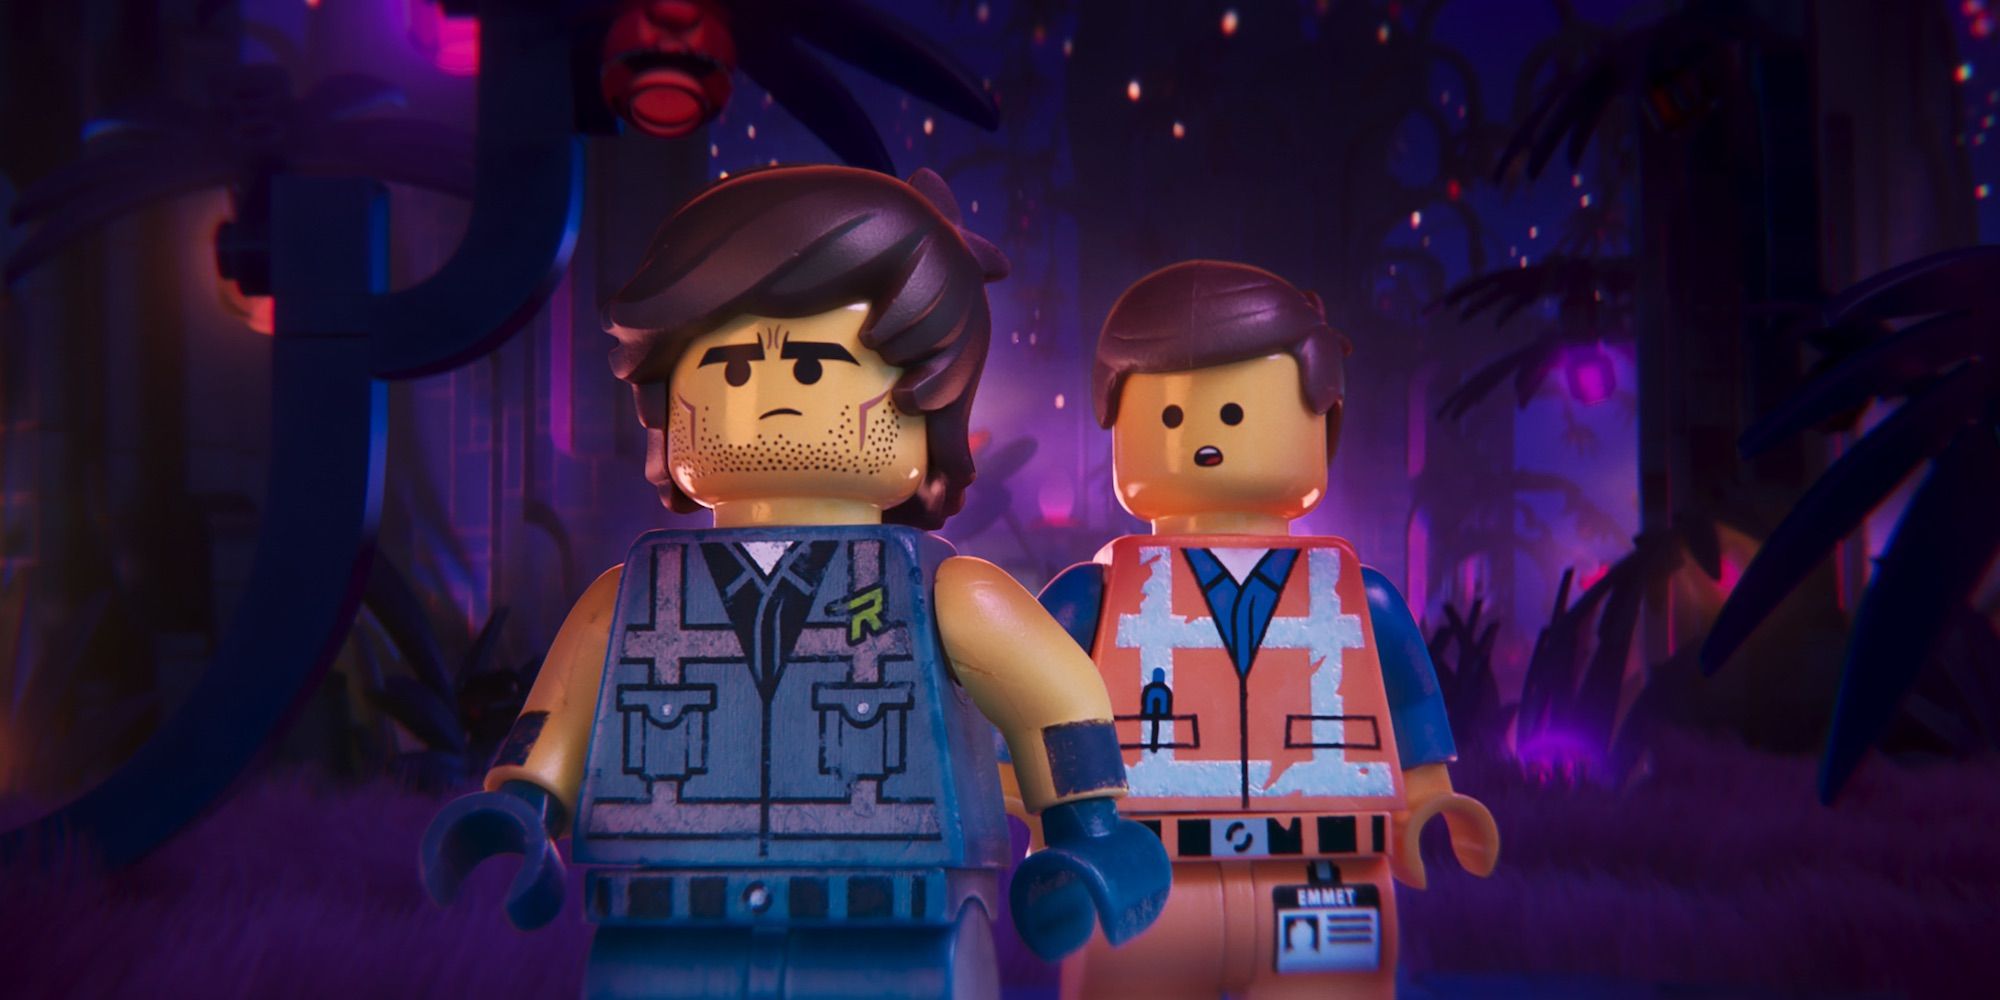 The LEGO Movie 2 The Second Part Rex Dangervest and Emmet